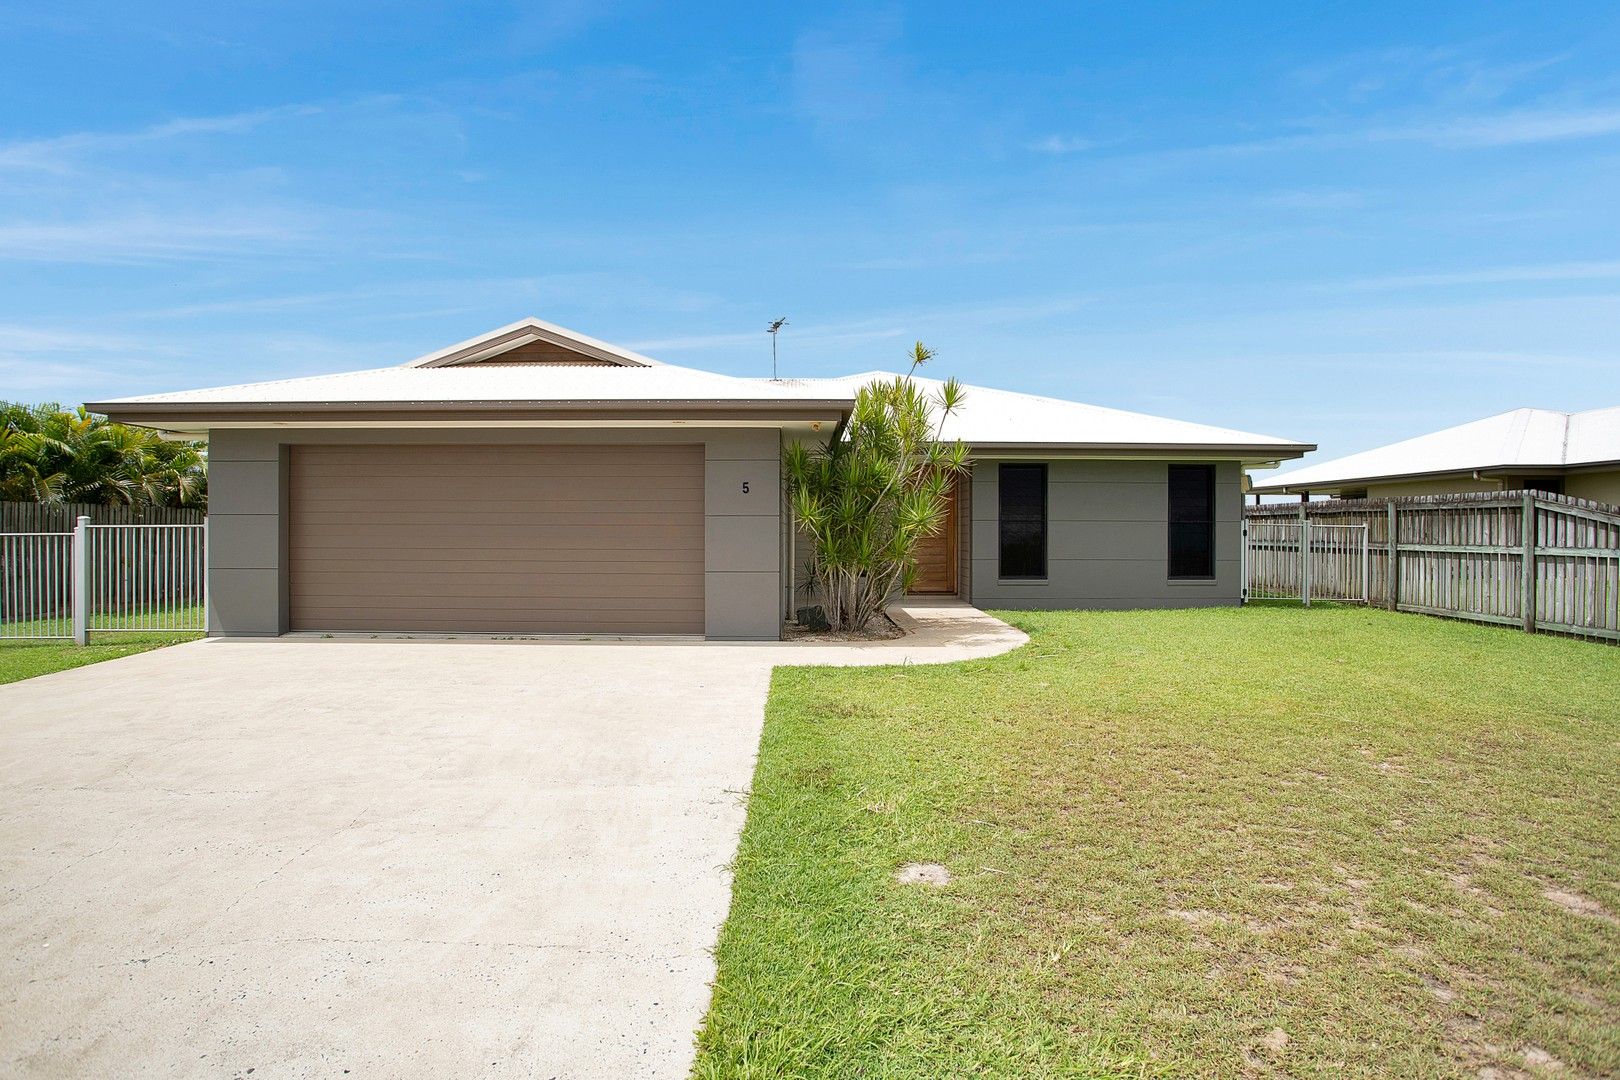 4 bedrooms Acreage / Semi-Rural in 5 Lucy Court MIRANI QLD, 4754